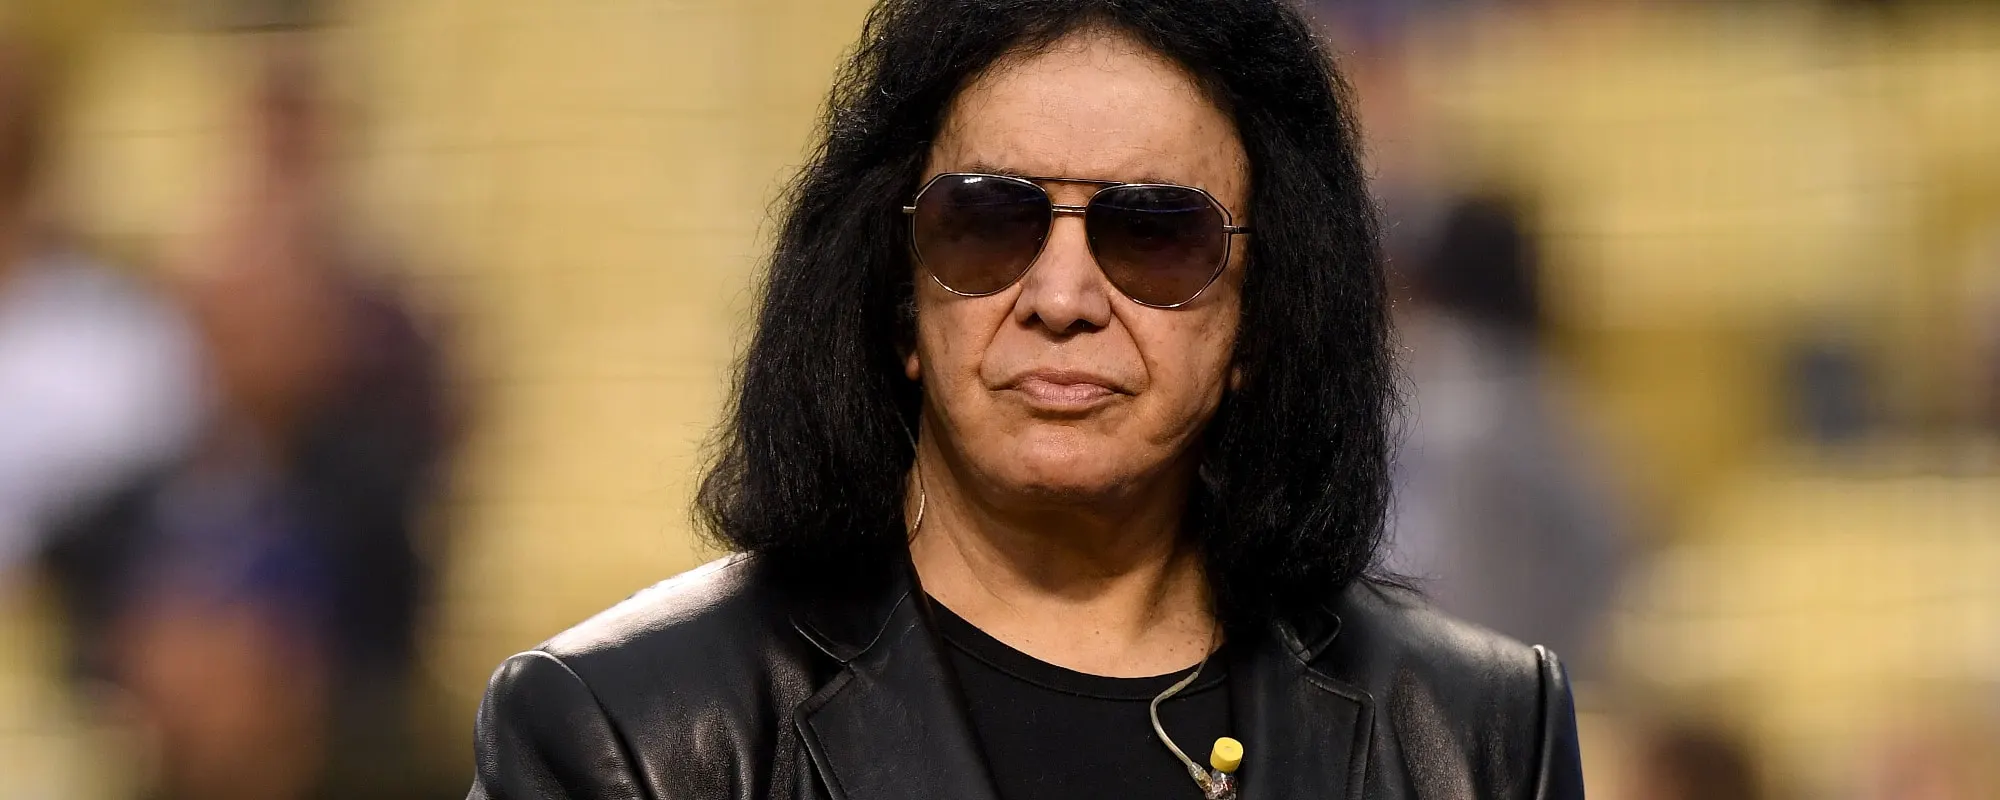 Gene Simmons Speaks Out on Putin: “Outright Lie”